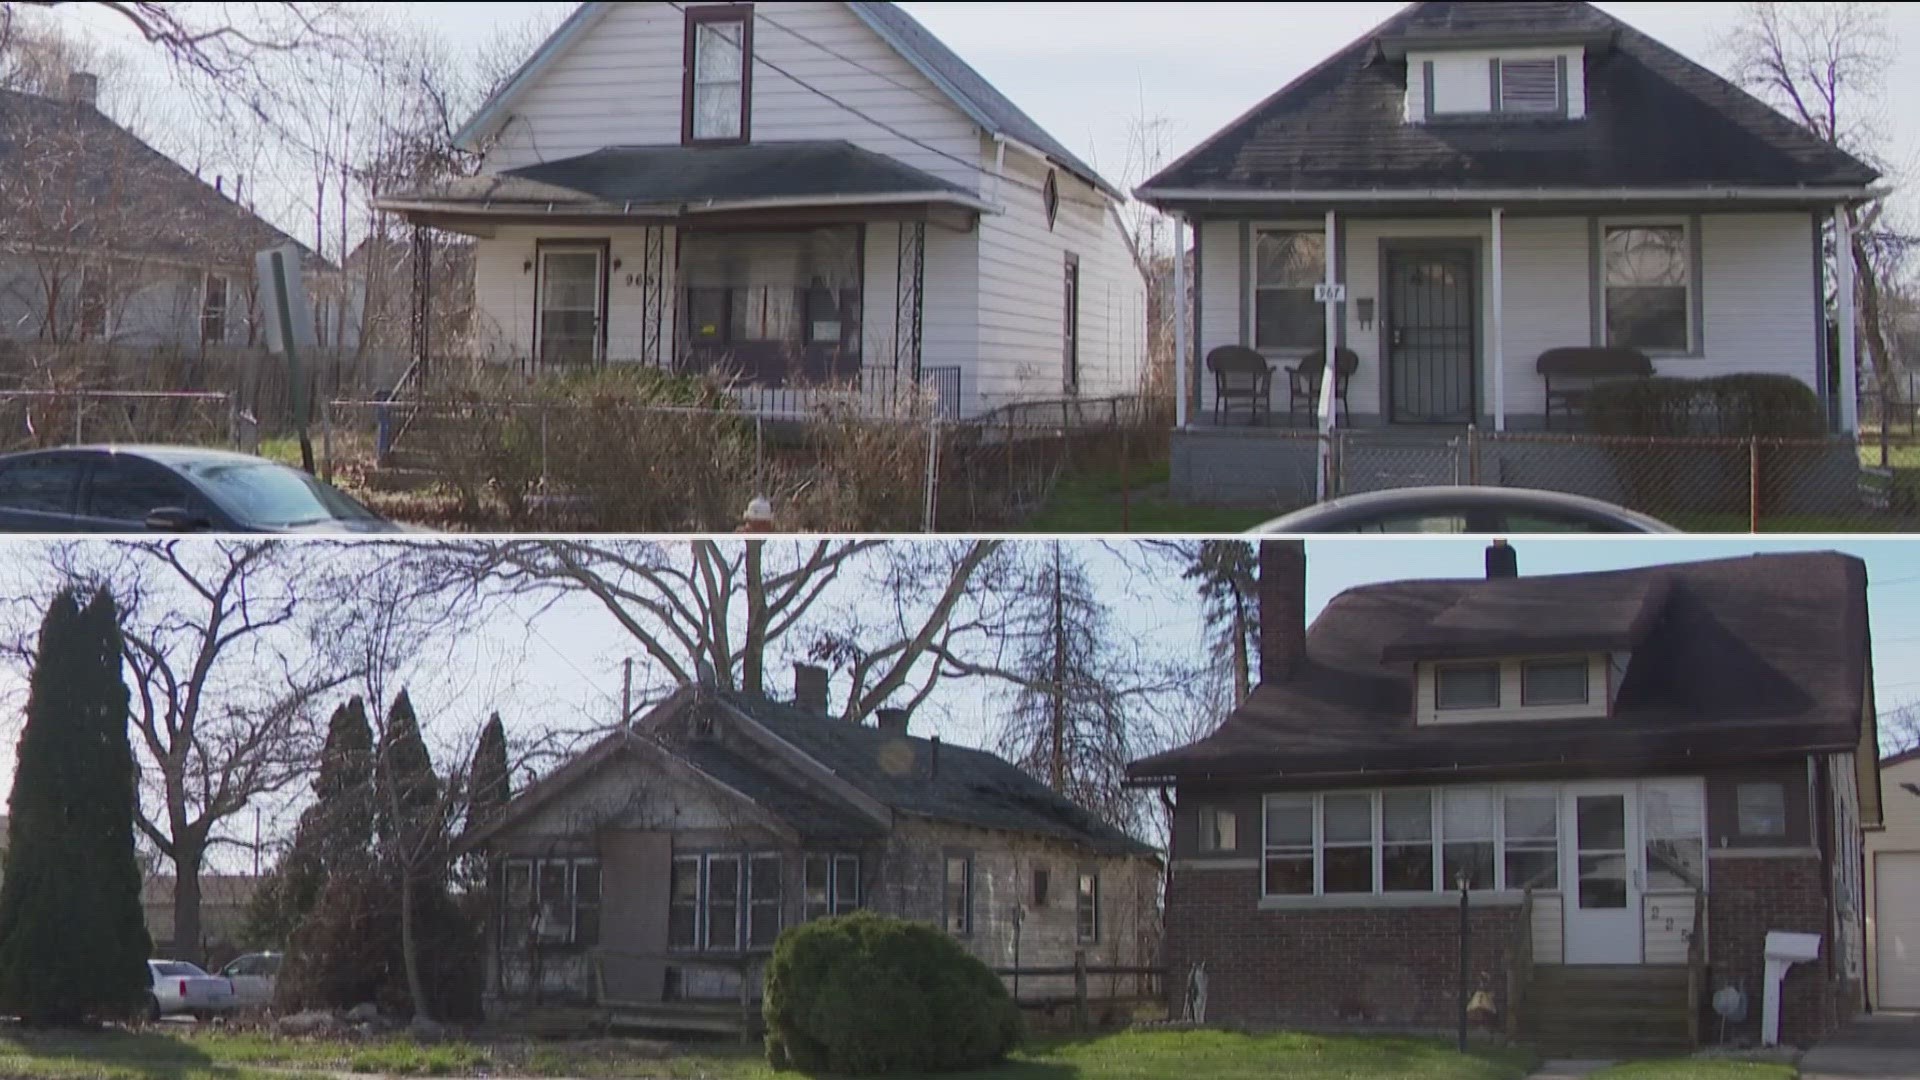 Both Toledoans, who live on two different streets, said they've complained to the city multiple times, but haven't gotten answers about houses left by dead neighbors